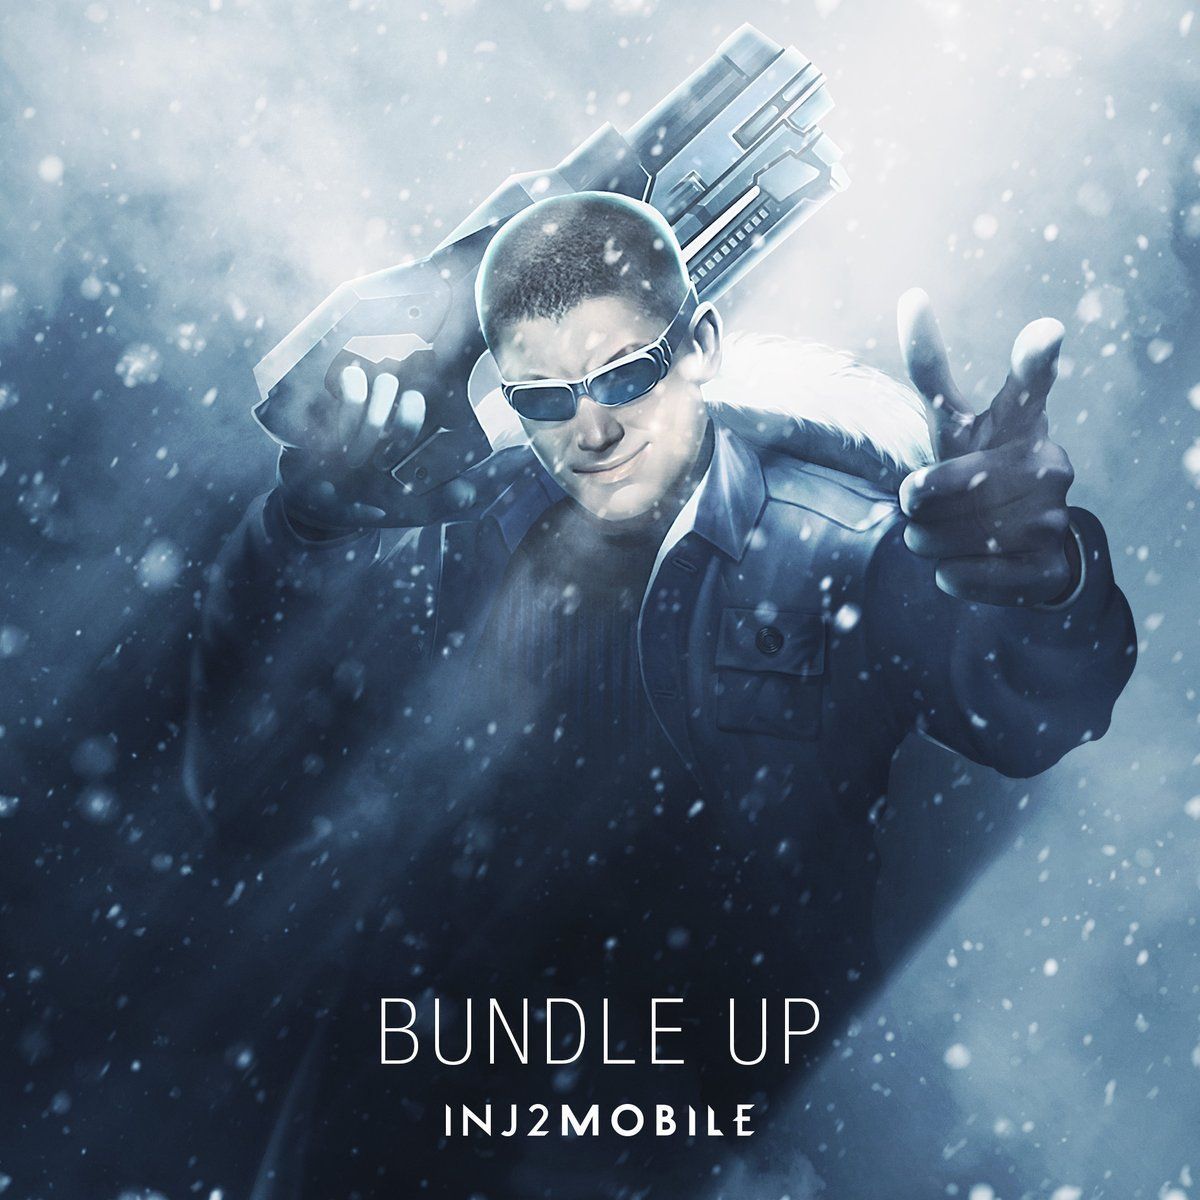 Cold to my Flash. captain cold. Superhero wallpaper, Cold, Leonard snart